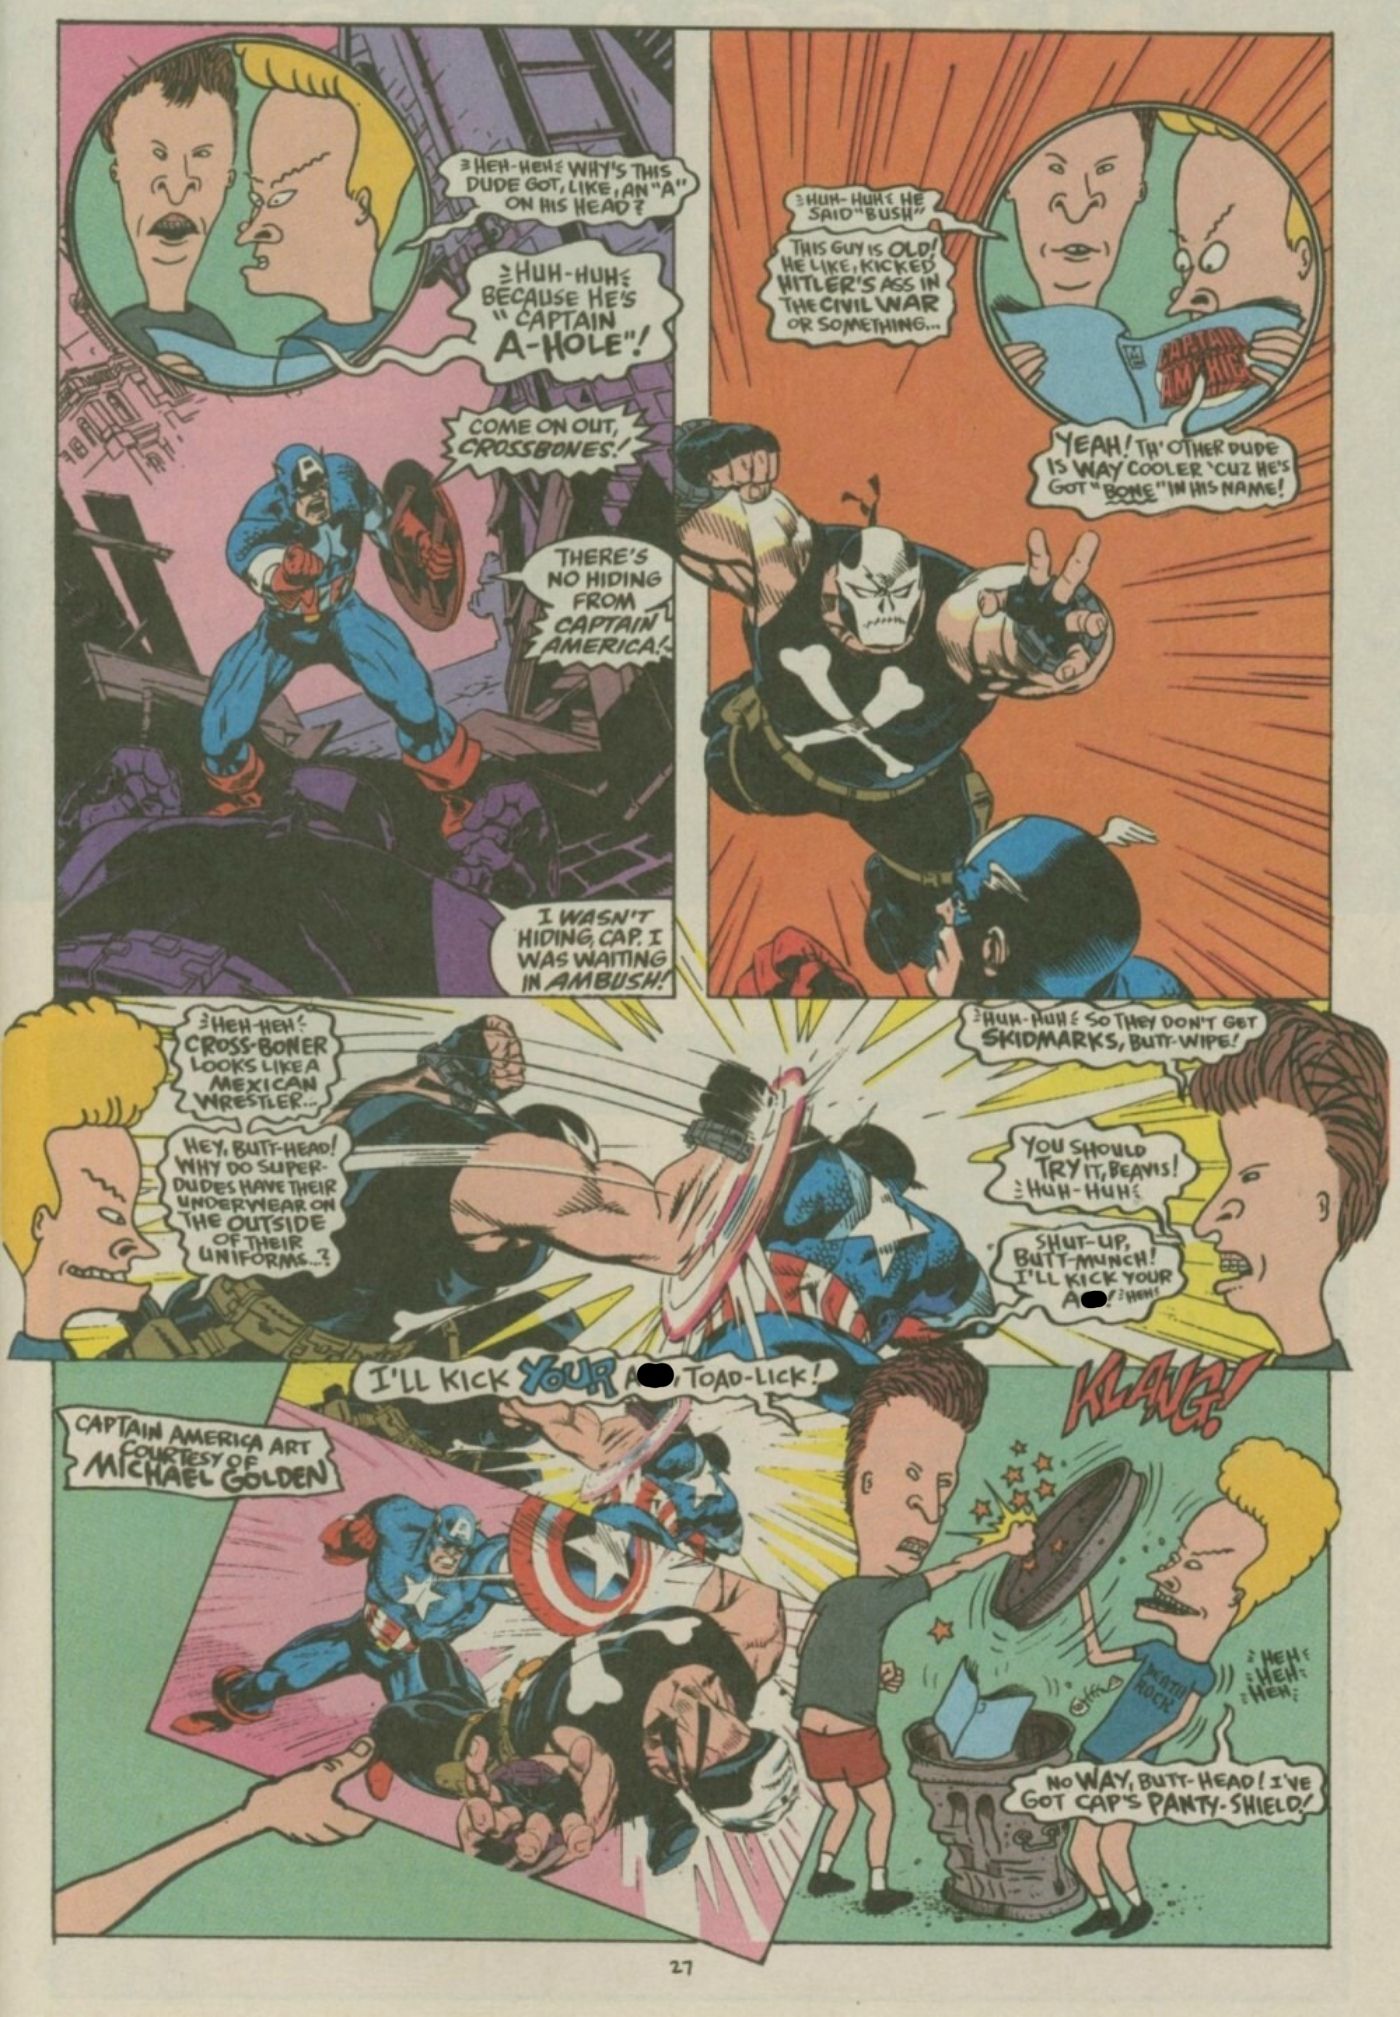 Beavis and Butt-Head reading and commenting on a Captain America comic.